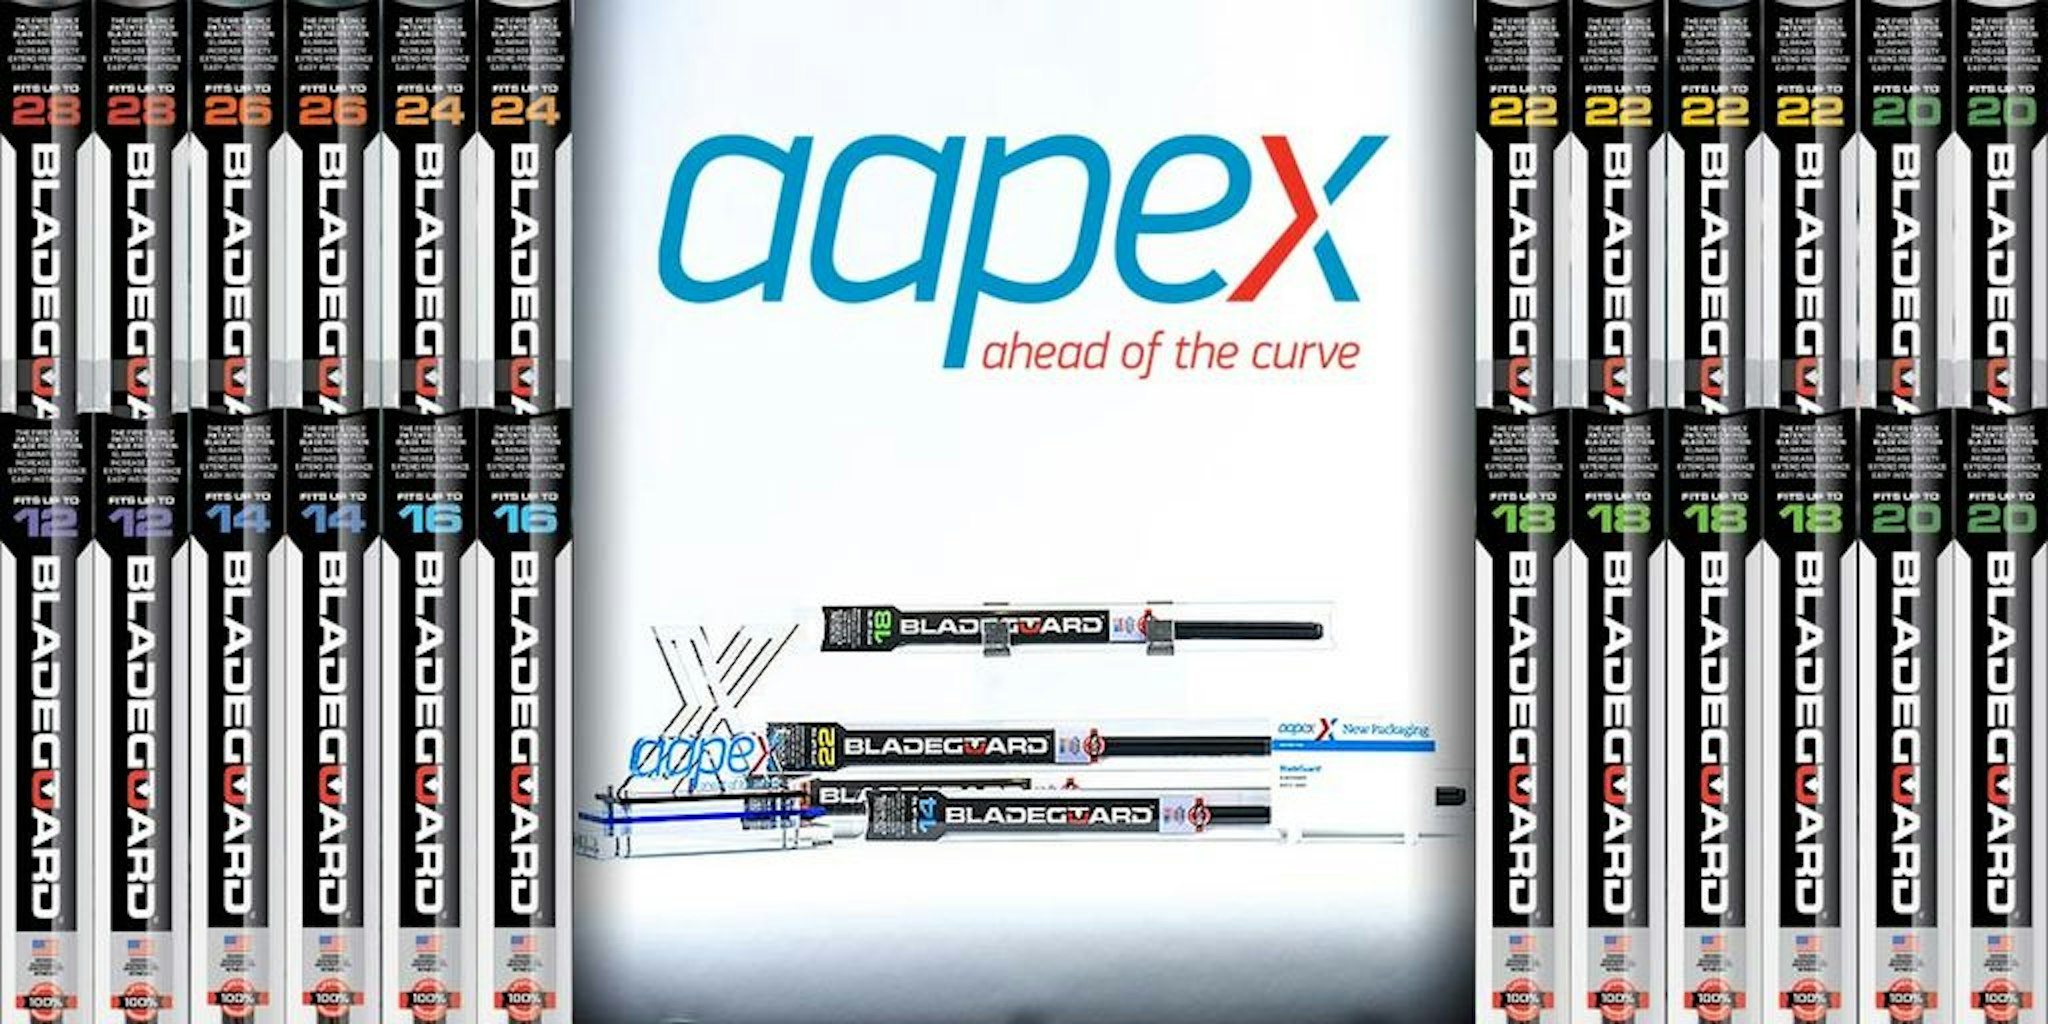 Glyphix packaging for Bladeguard featured in AAPEX New Packaging Showcase